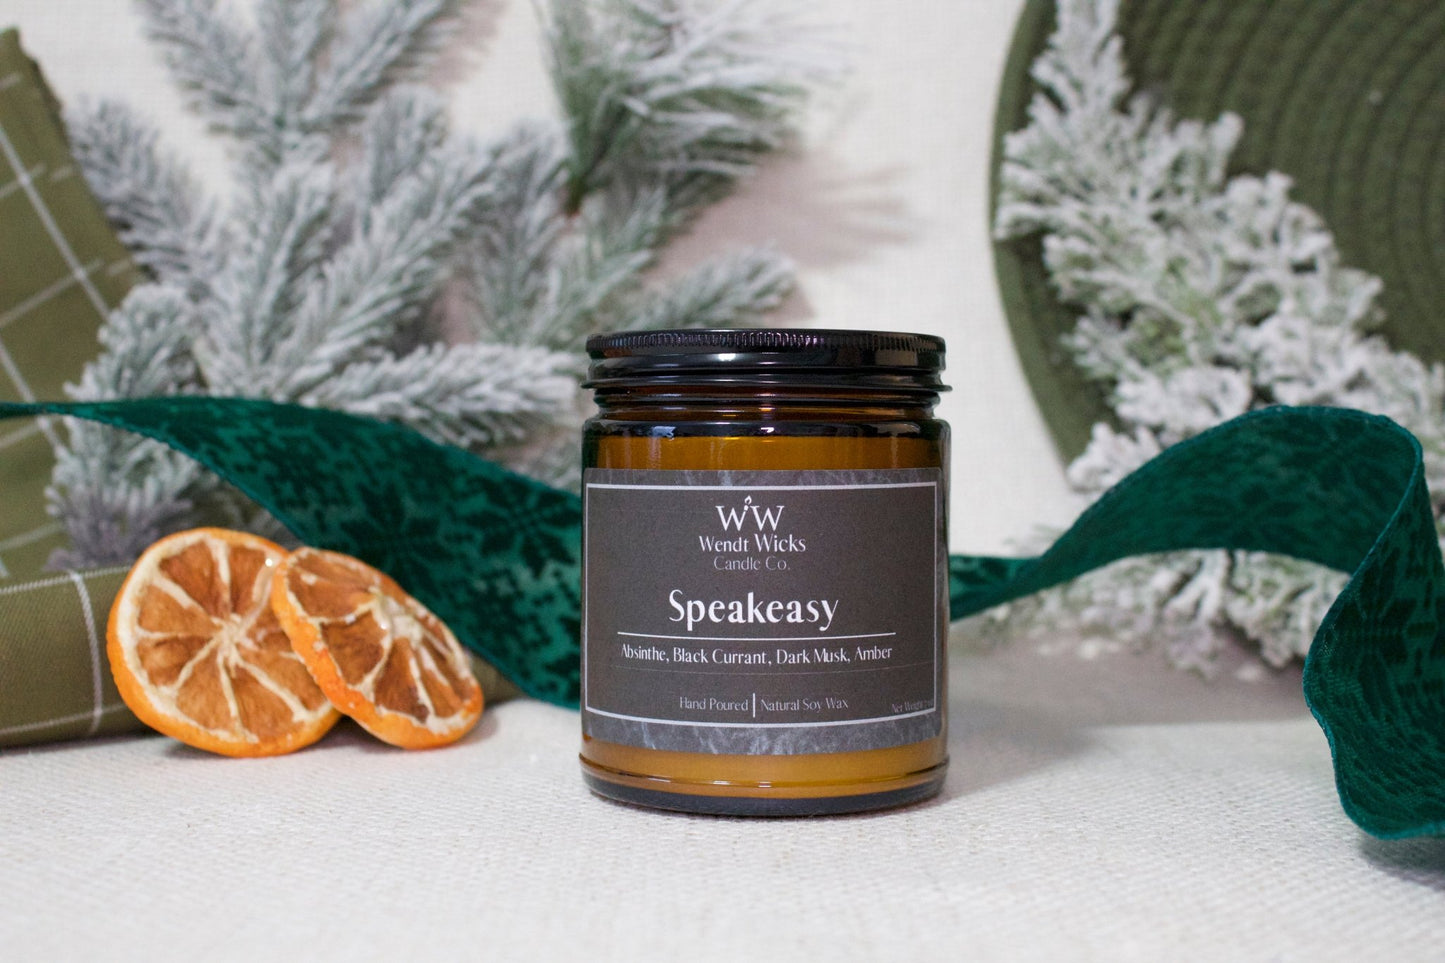 Speakeasy - Wendt Wicks Candle Co. - Amber candle